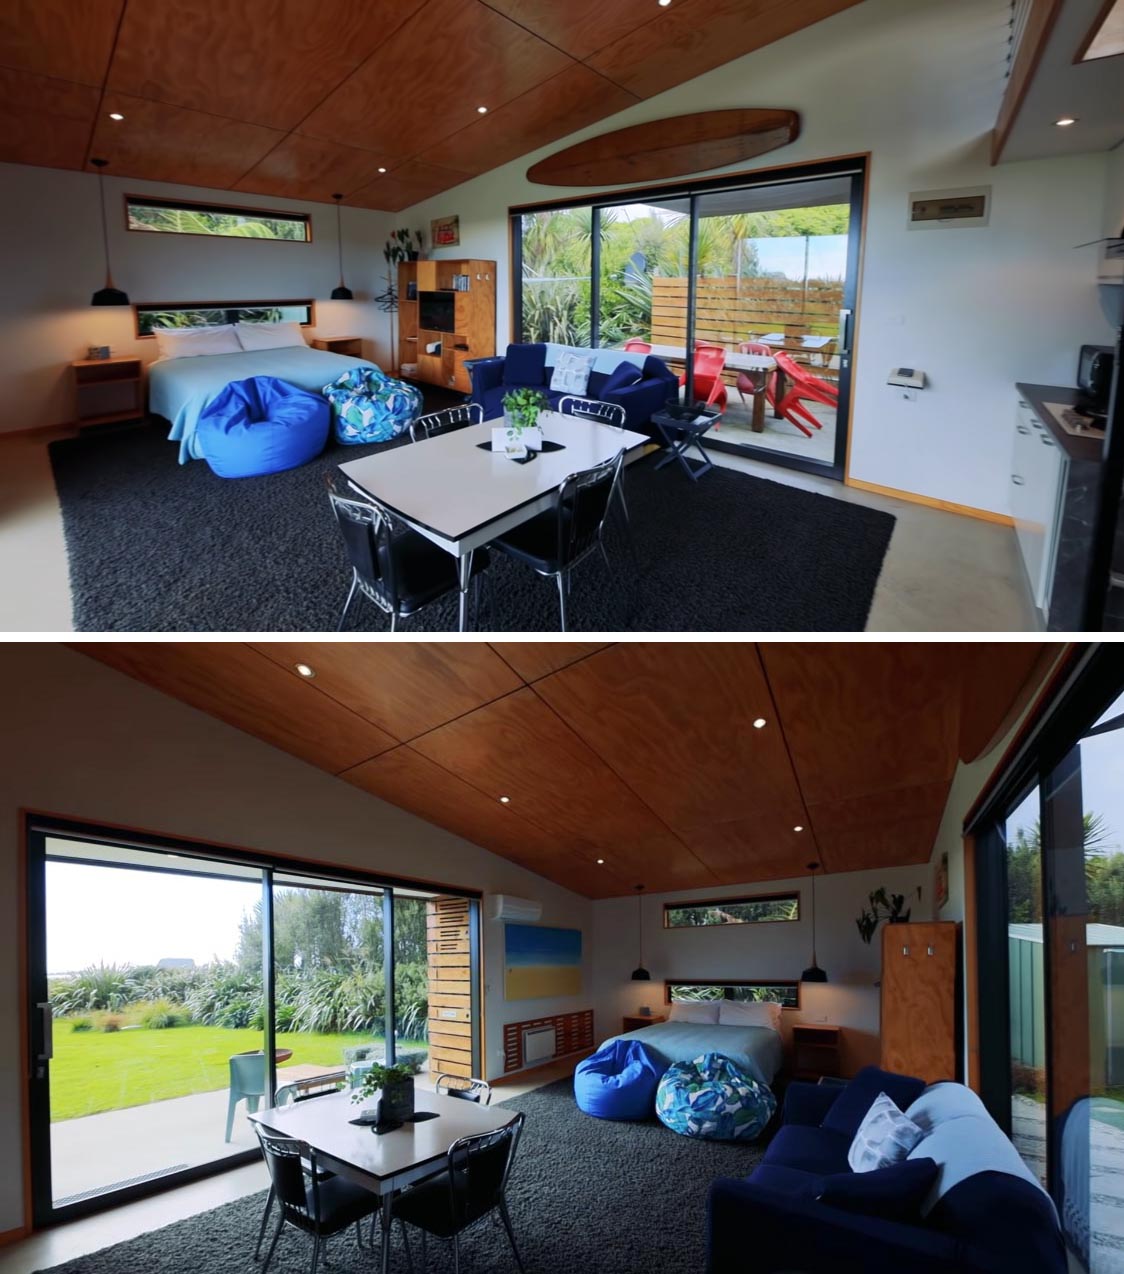 Stepping inside, and the design of this modern tiny home is open plan, with the bedroom, dining area, and kitchen all sharing the same space. 